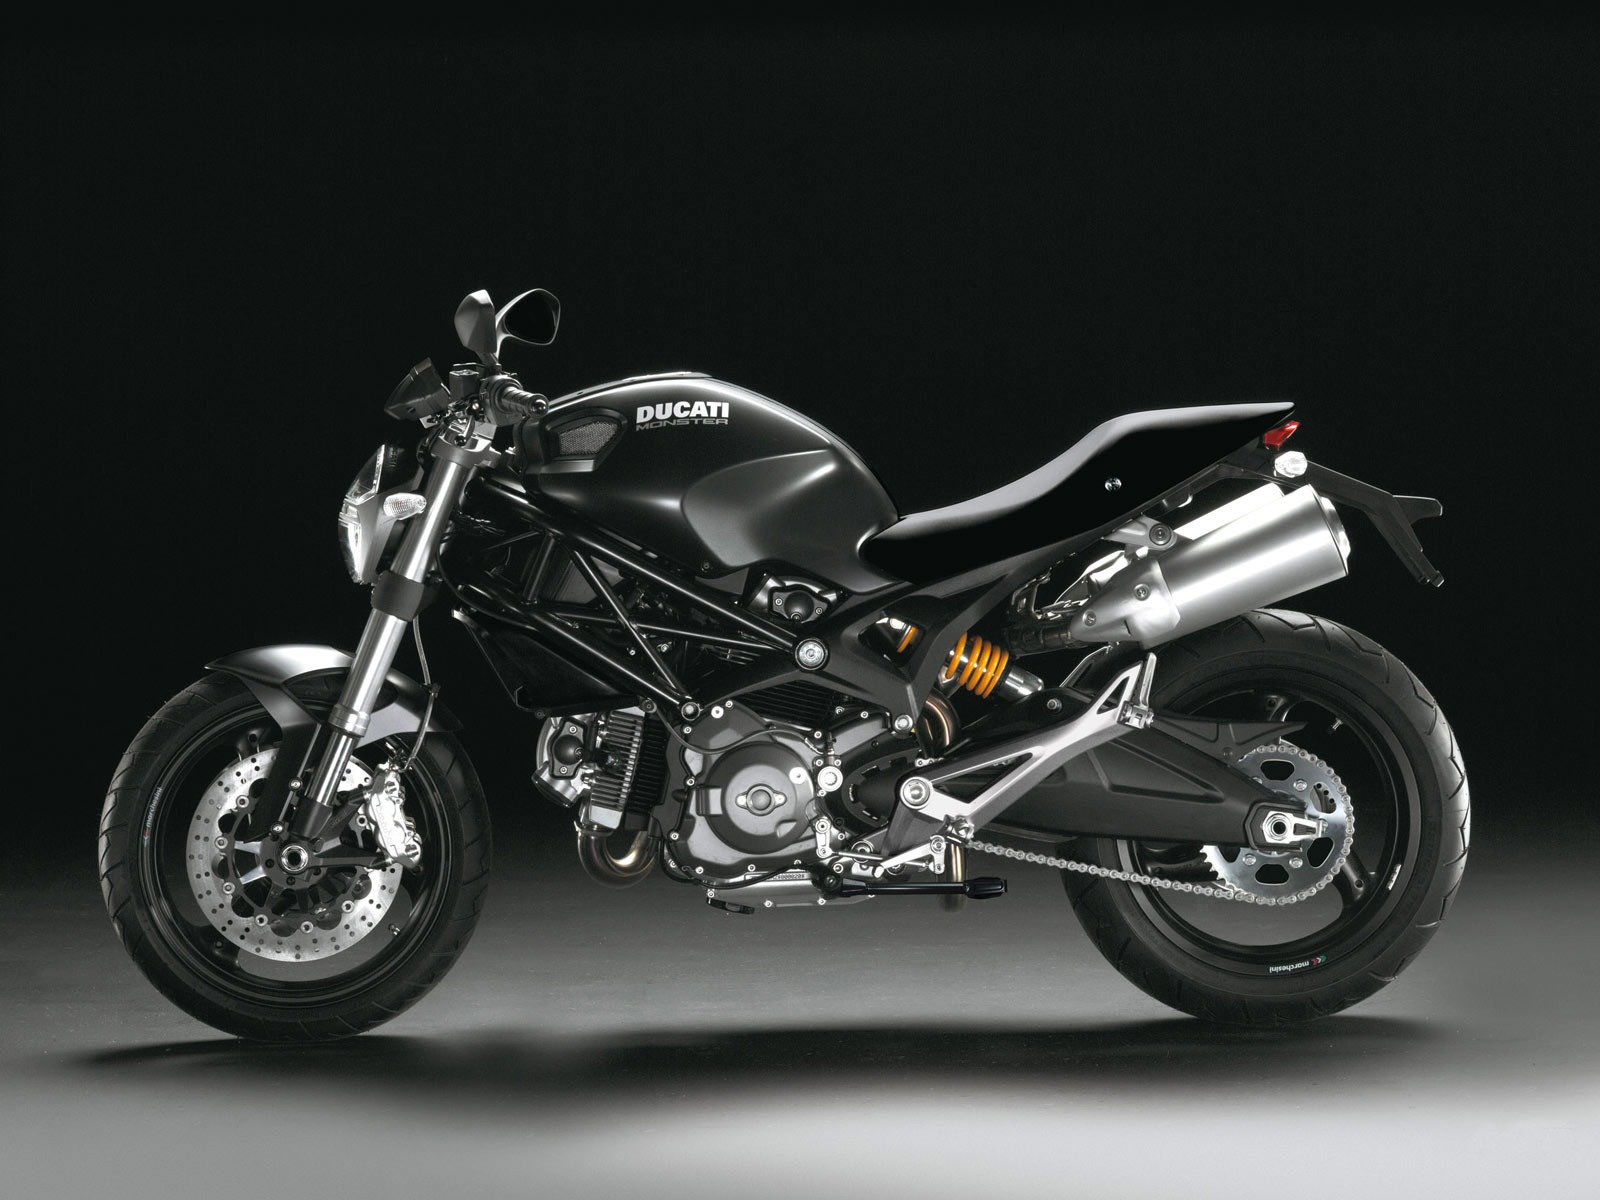 2009 DUCATI Monster 696 Accident Lawyers Info